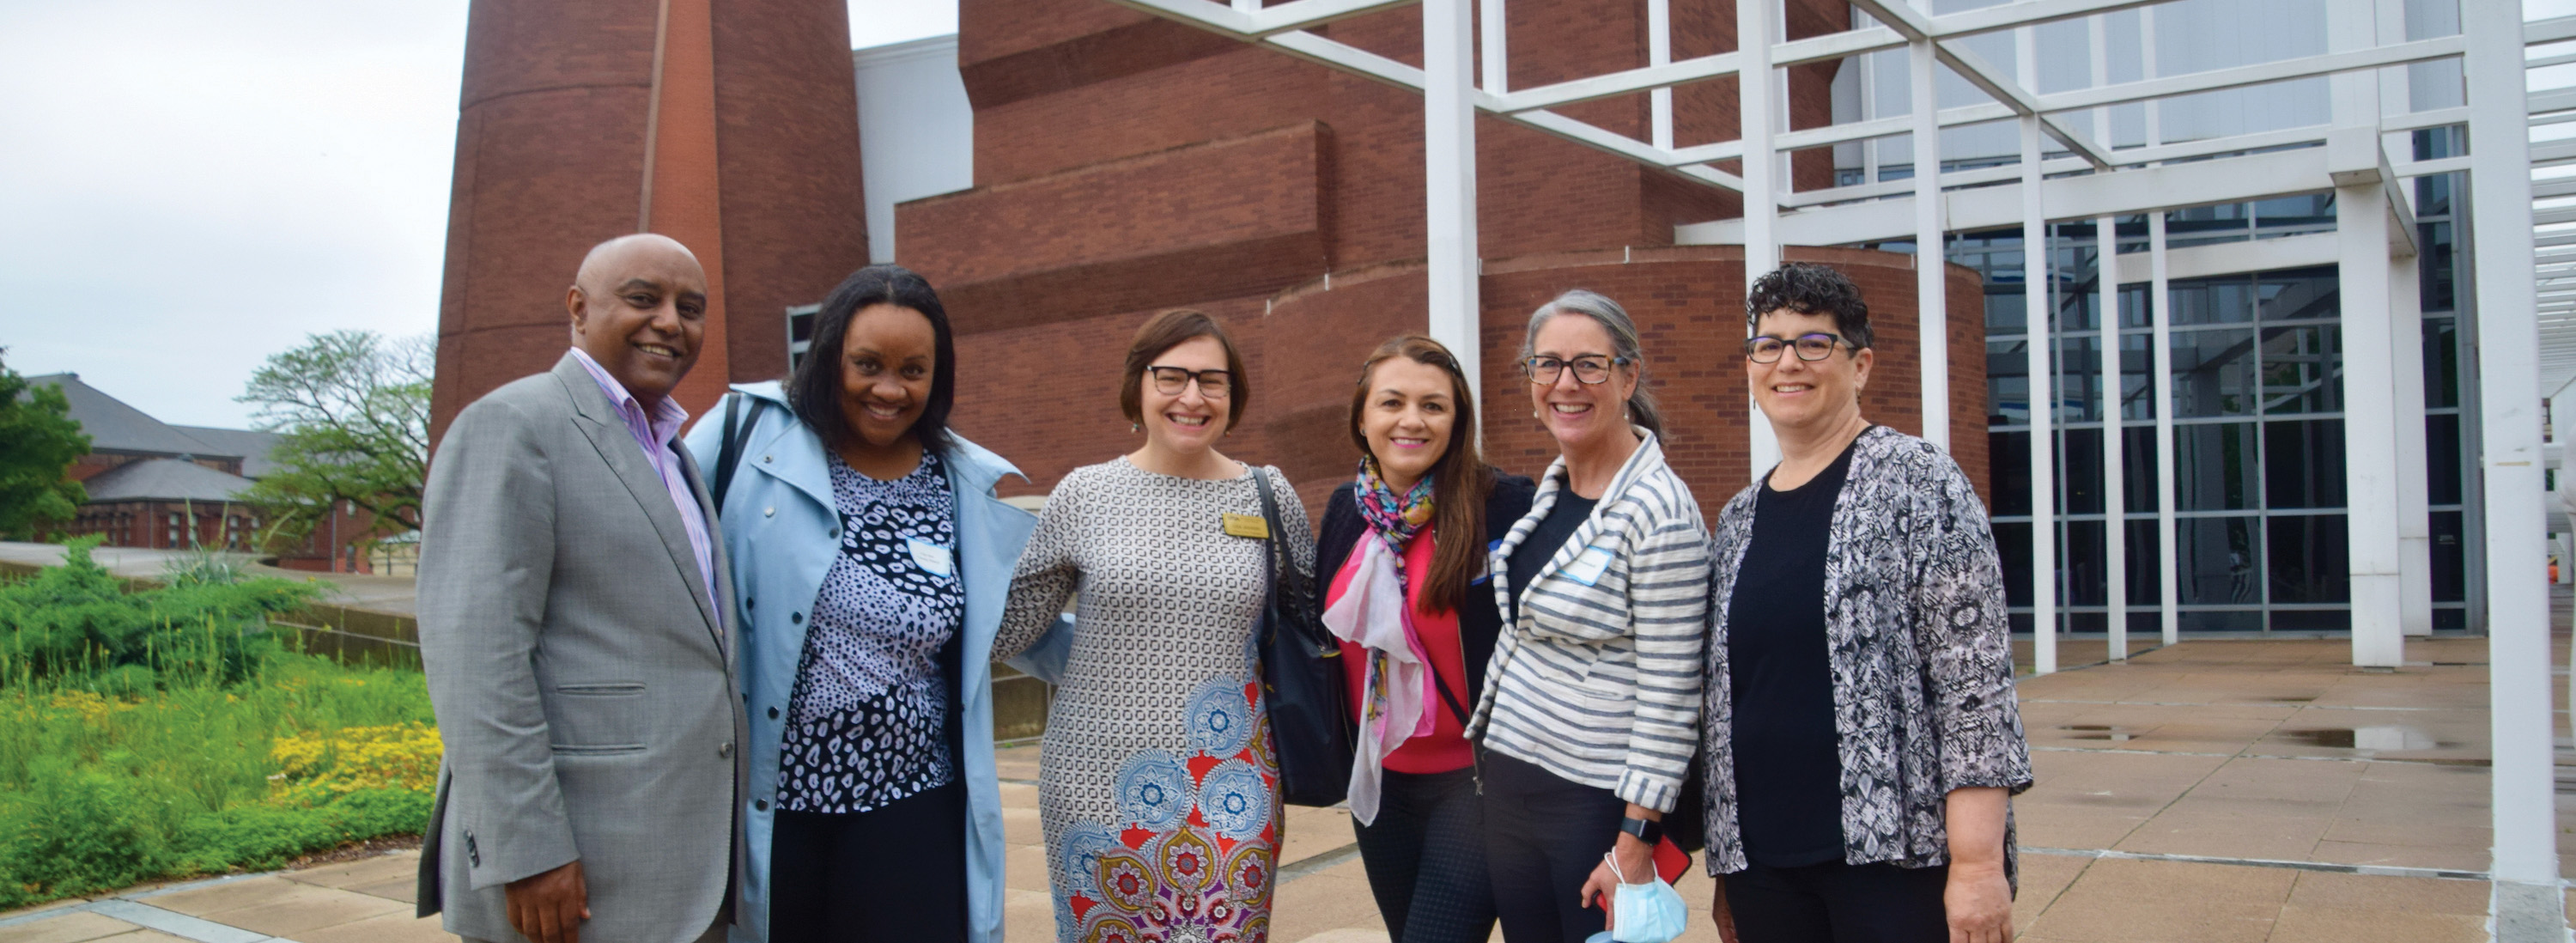 Group of International Partners smiling outside of Wexner Center for the Arts